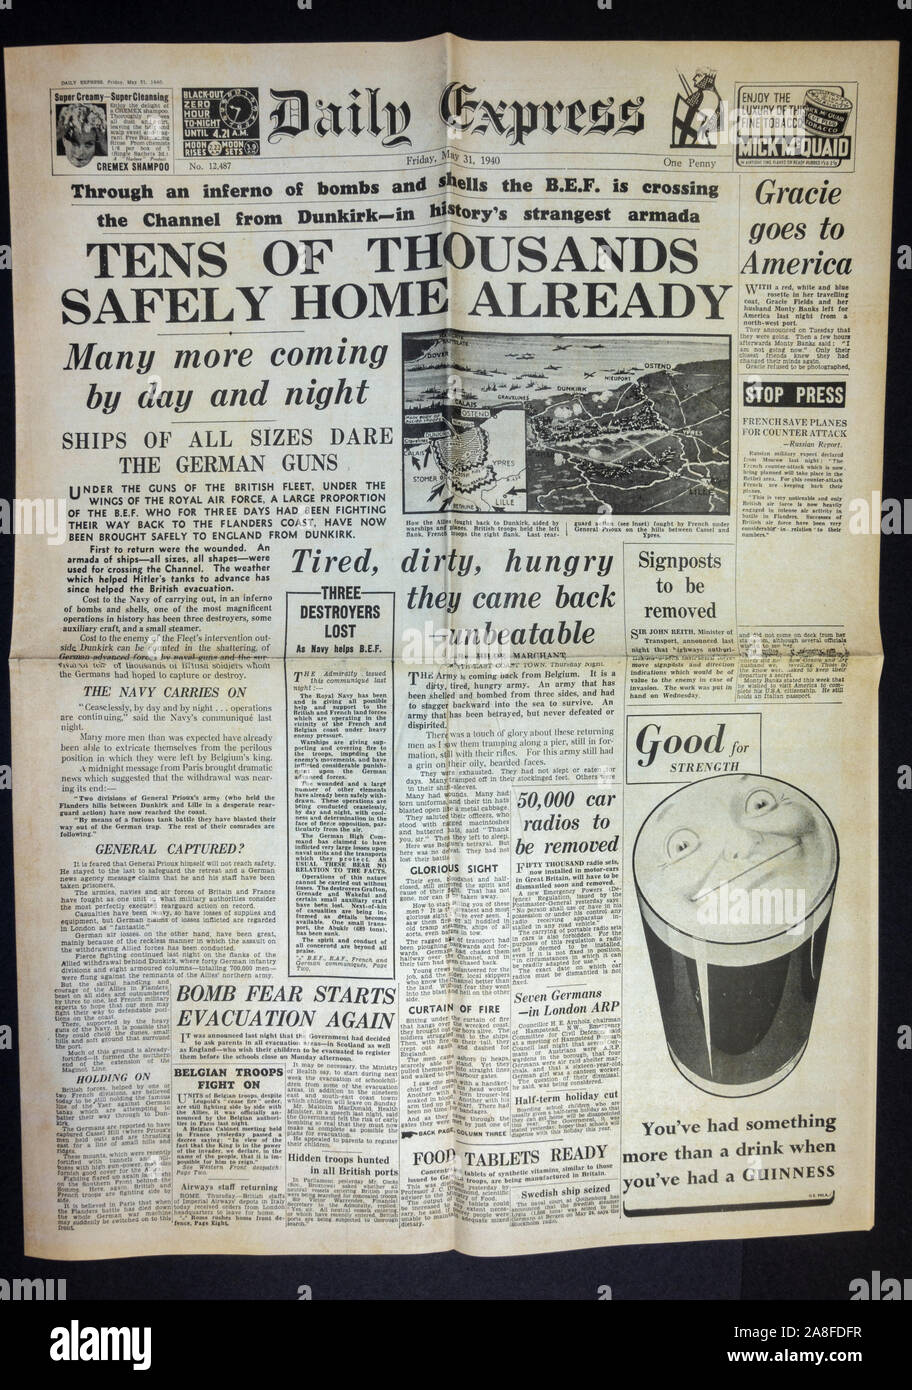 Replica of the Daily Express newspaper on 31st May 1940 showing the Dunkirk evacuation with the headline 'Tens of thousands safely home already'. Stock Photo